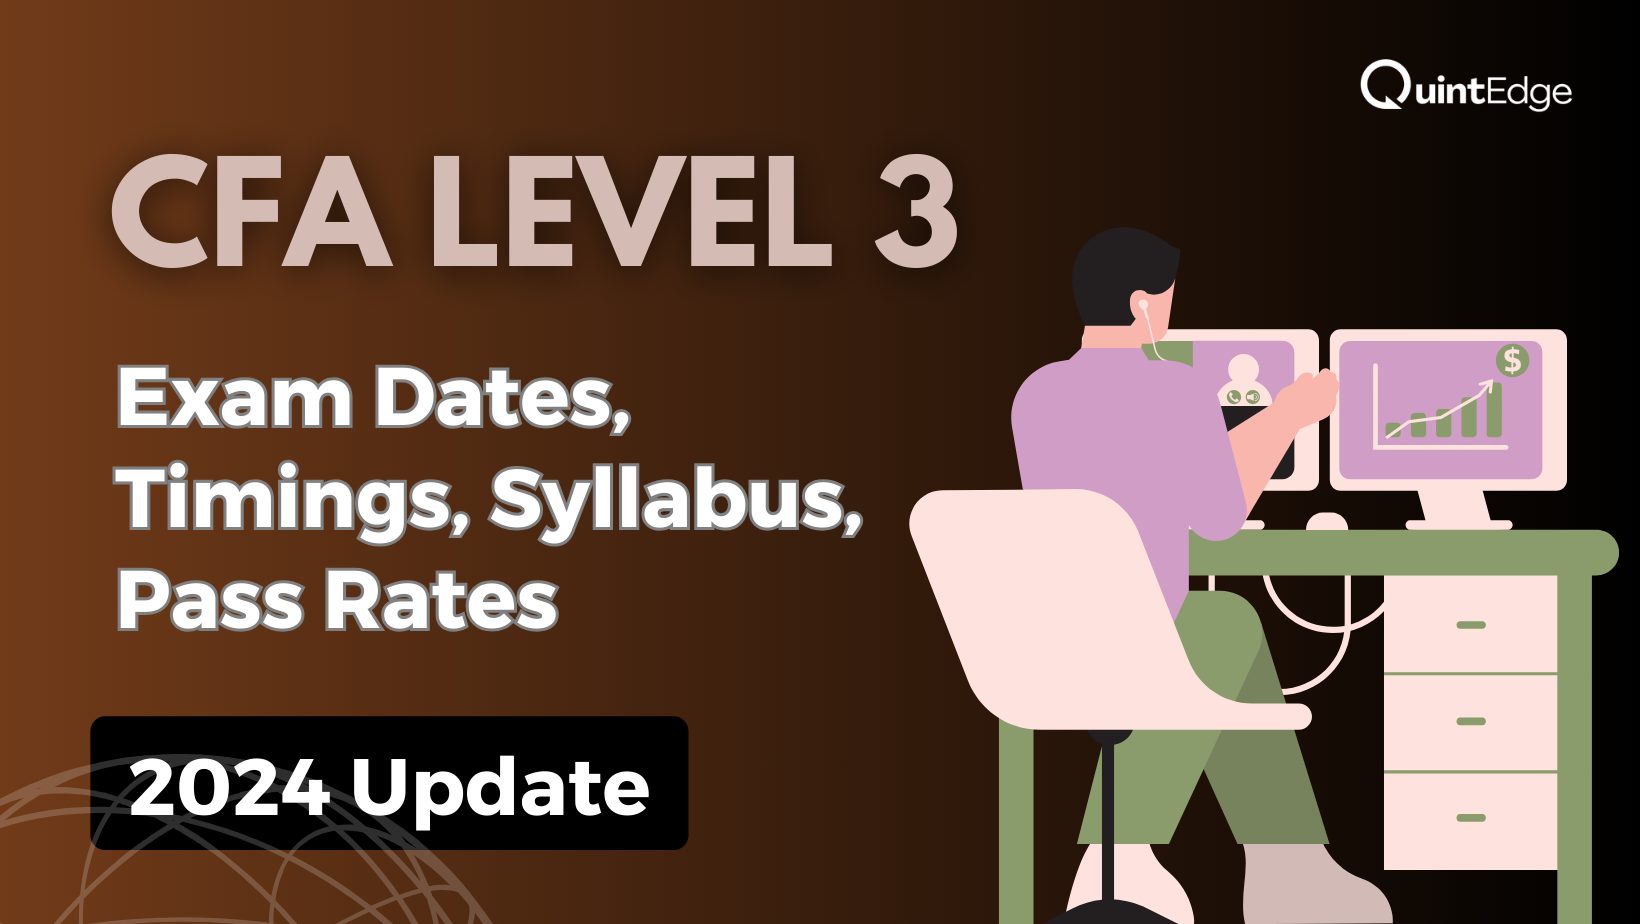 CFA Level 3 Exam Syllabus, Registration, Fees, Pass Rates and more